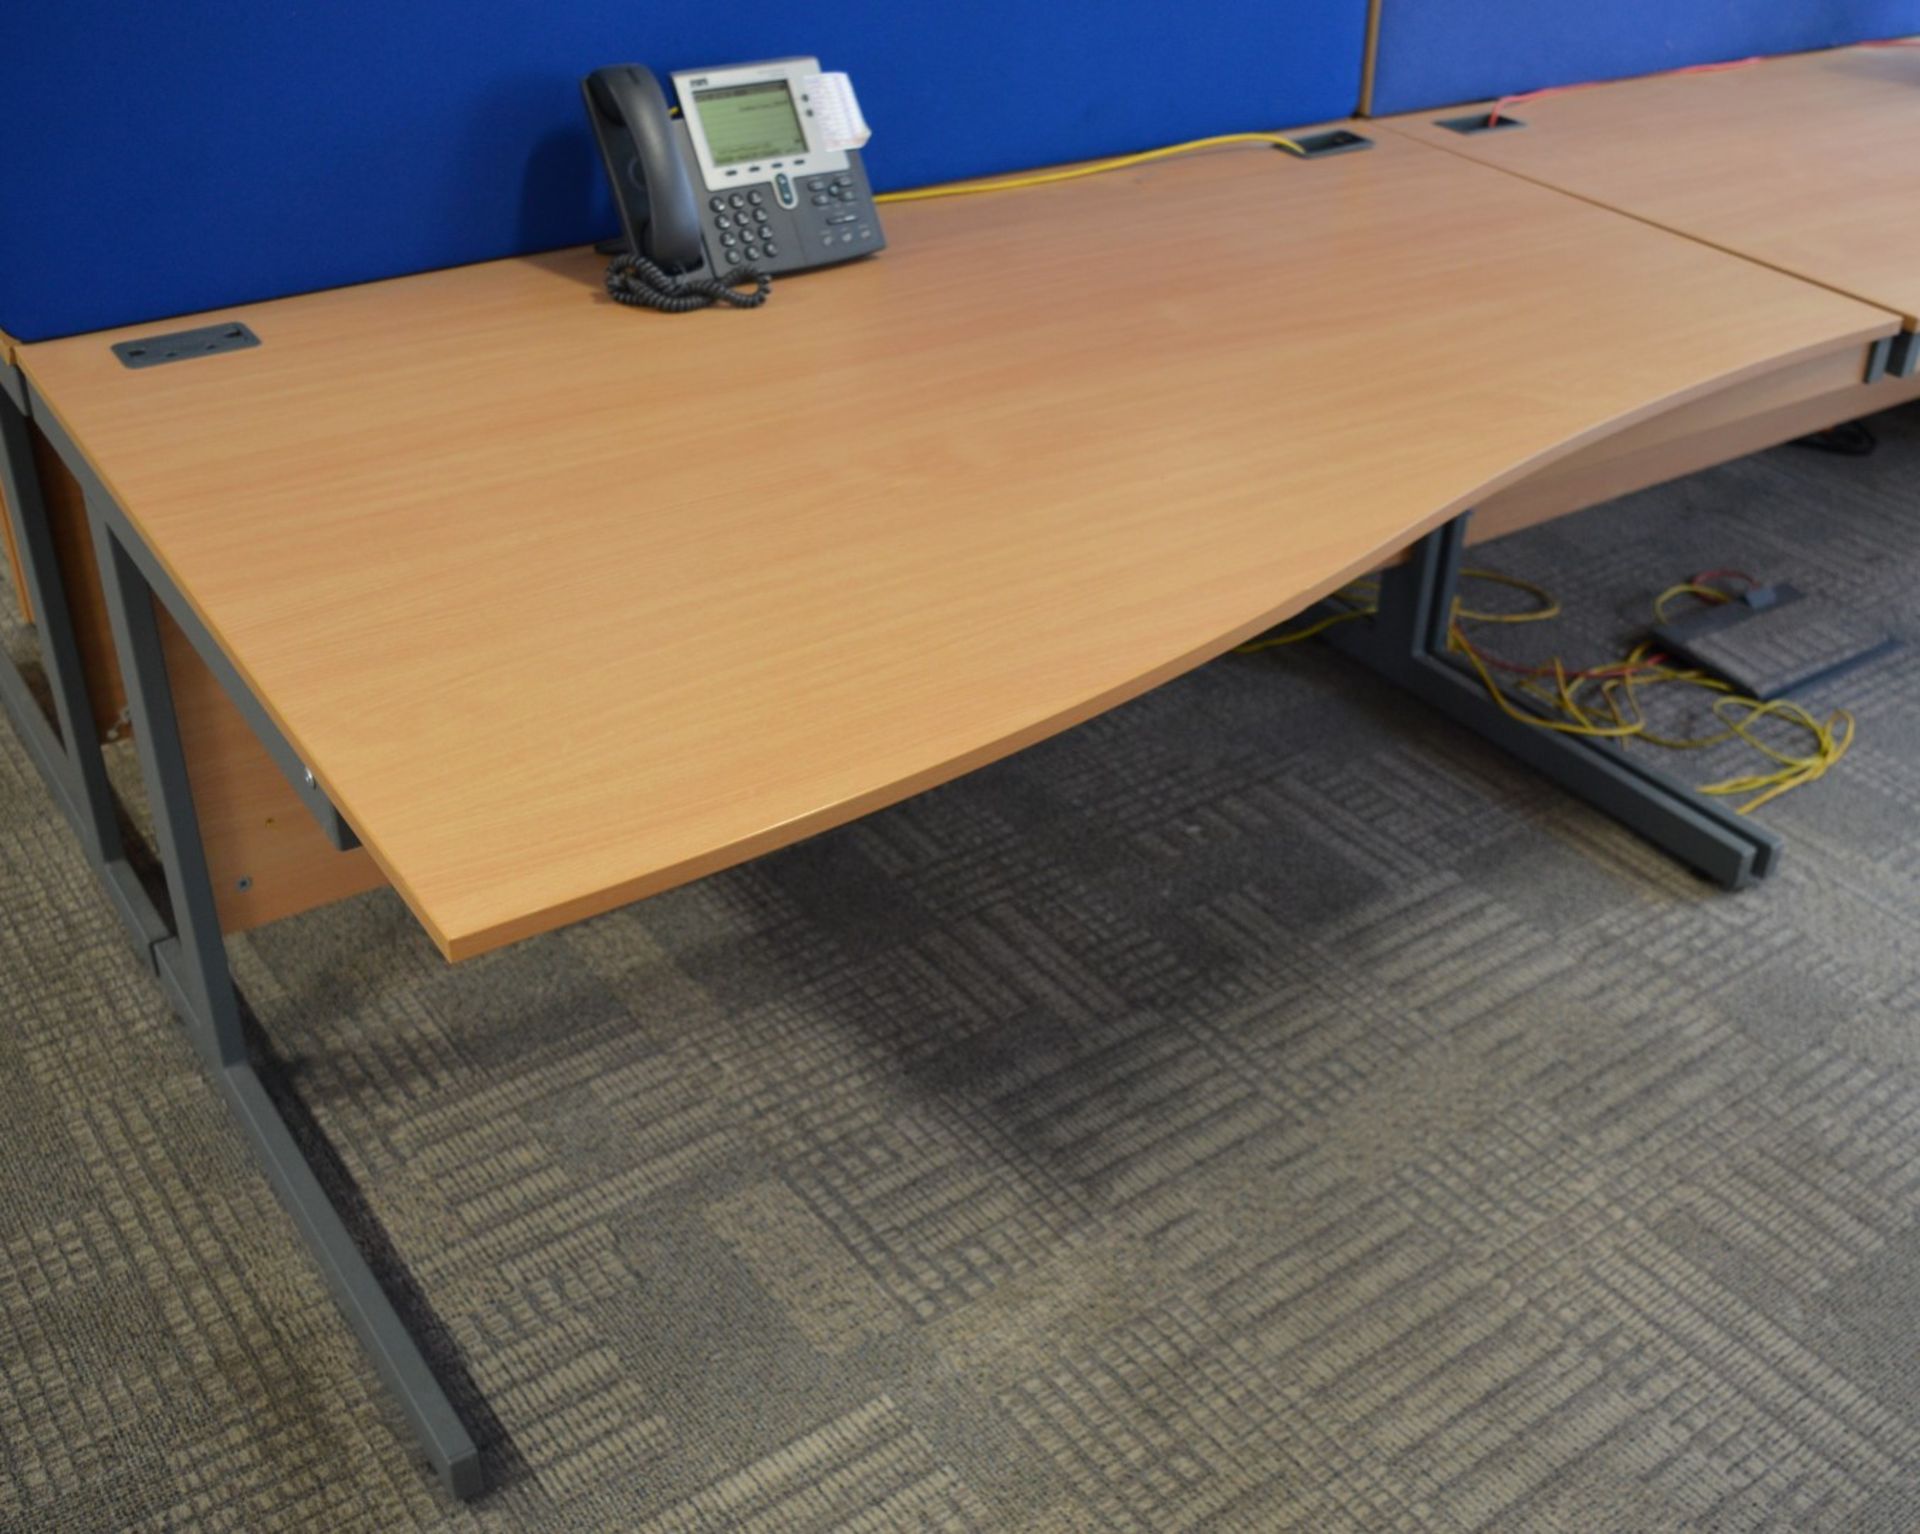 6 x Imperial Office Desks With Partition Dividers - Includes 3 Left Hand & 3 Right Hand Desks - - Image 2 of 10